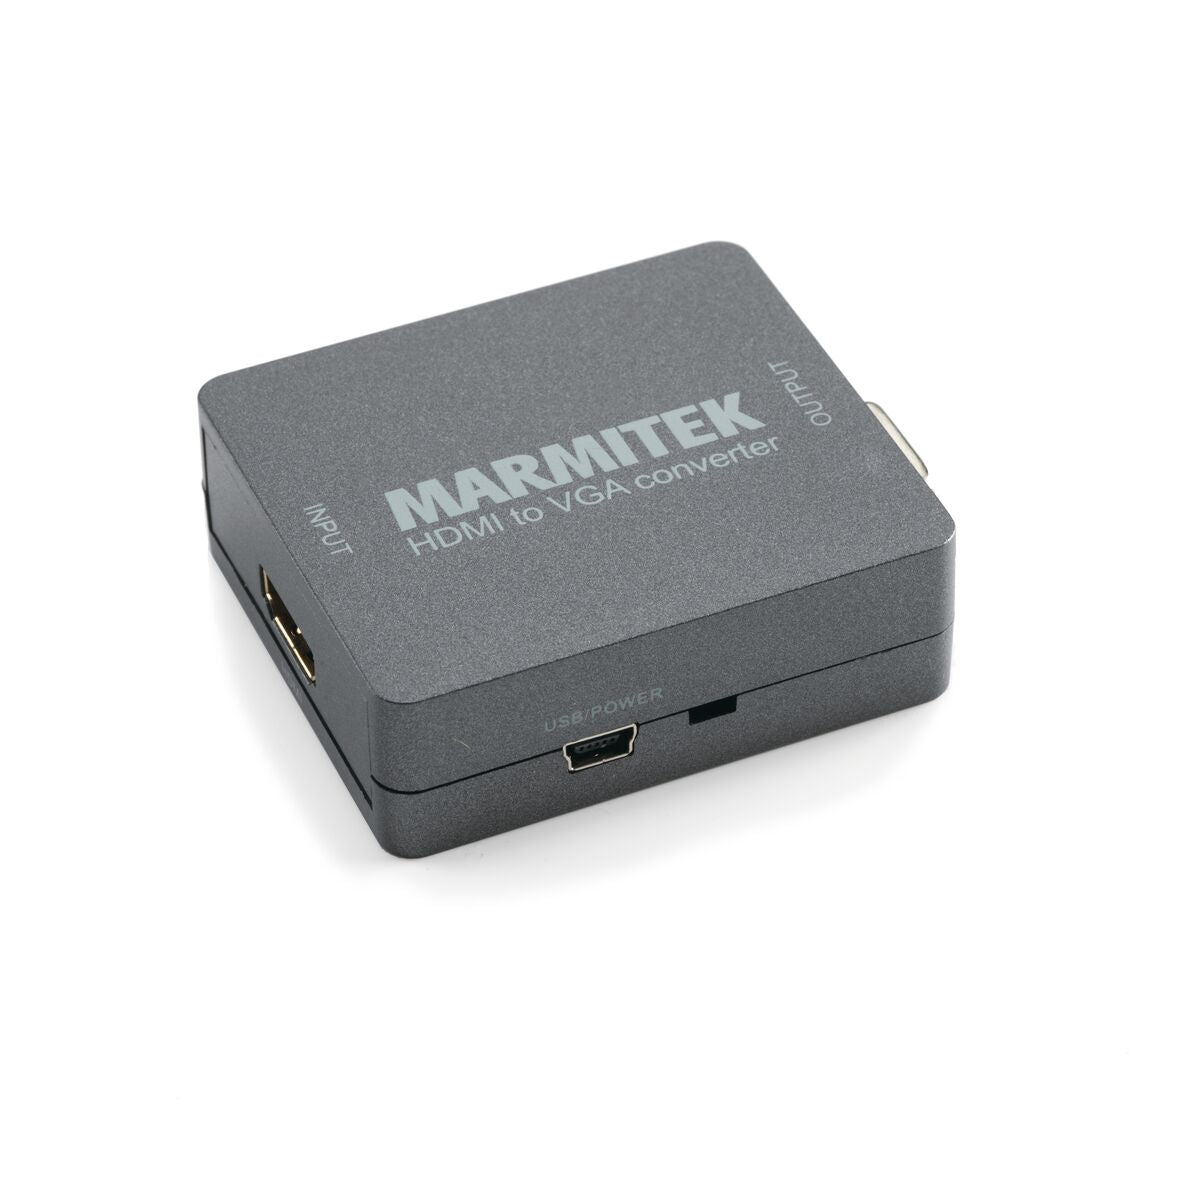 Connect HV15 - HDMI to VGA adapter - Product Image | Marmitek